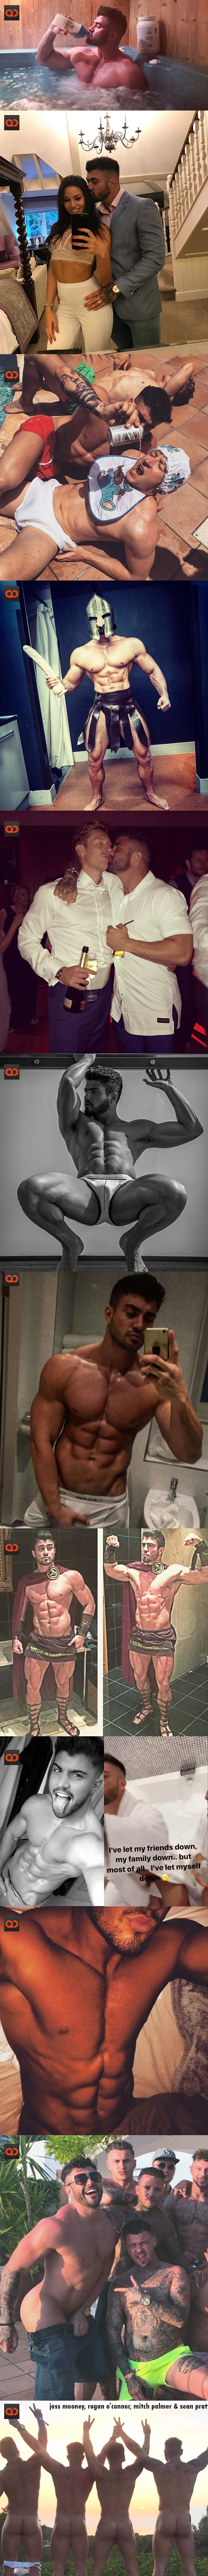 Rogan O'Connor, Ex On The Beach Star, Leaked Sex Tape Finally Hits!